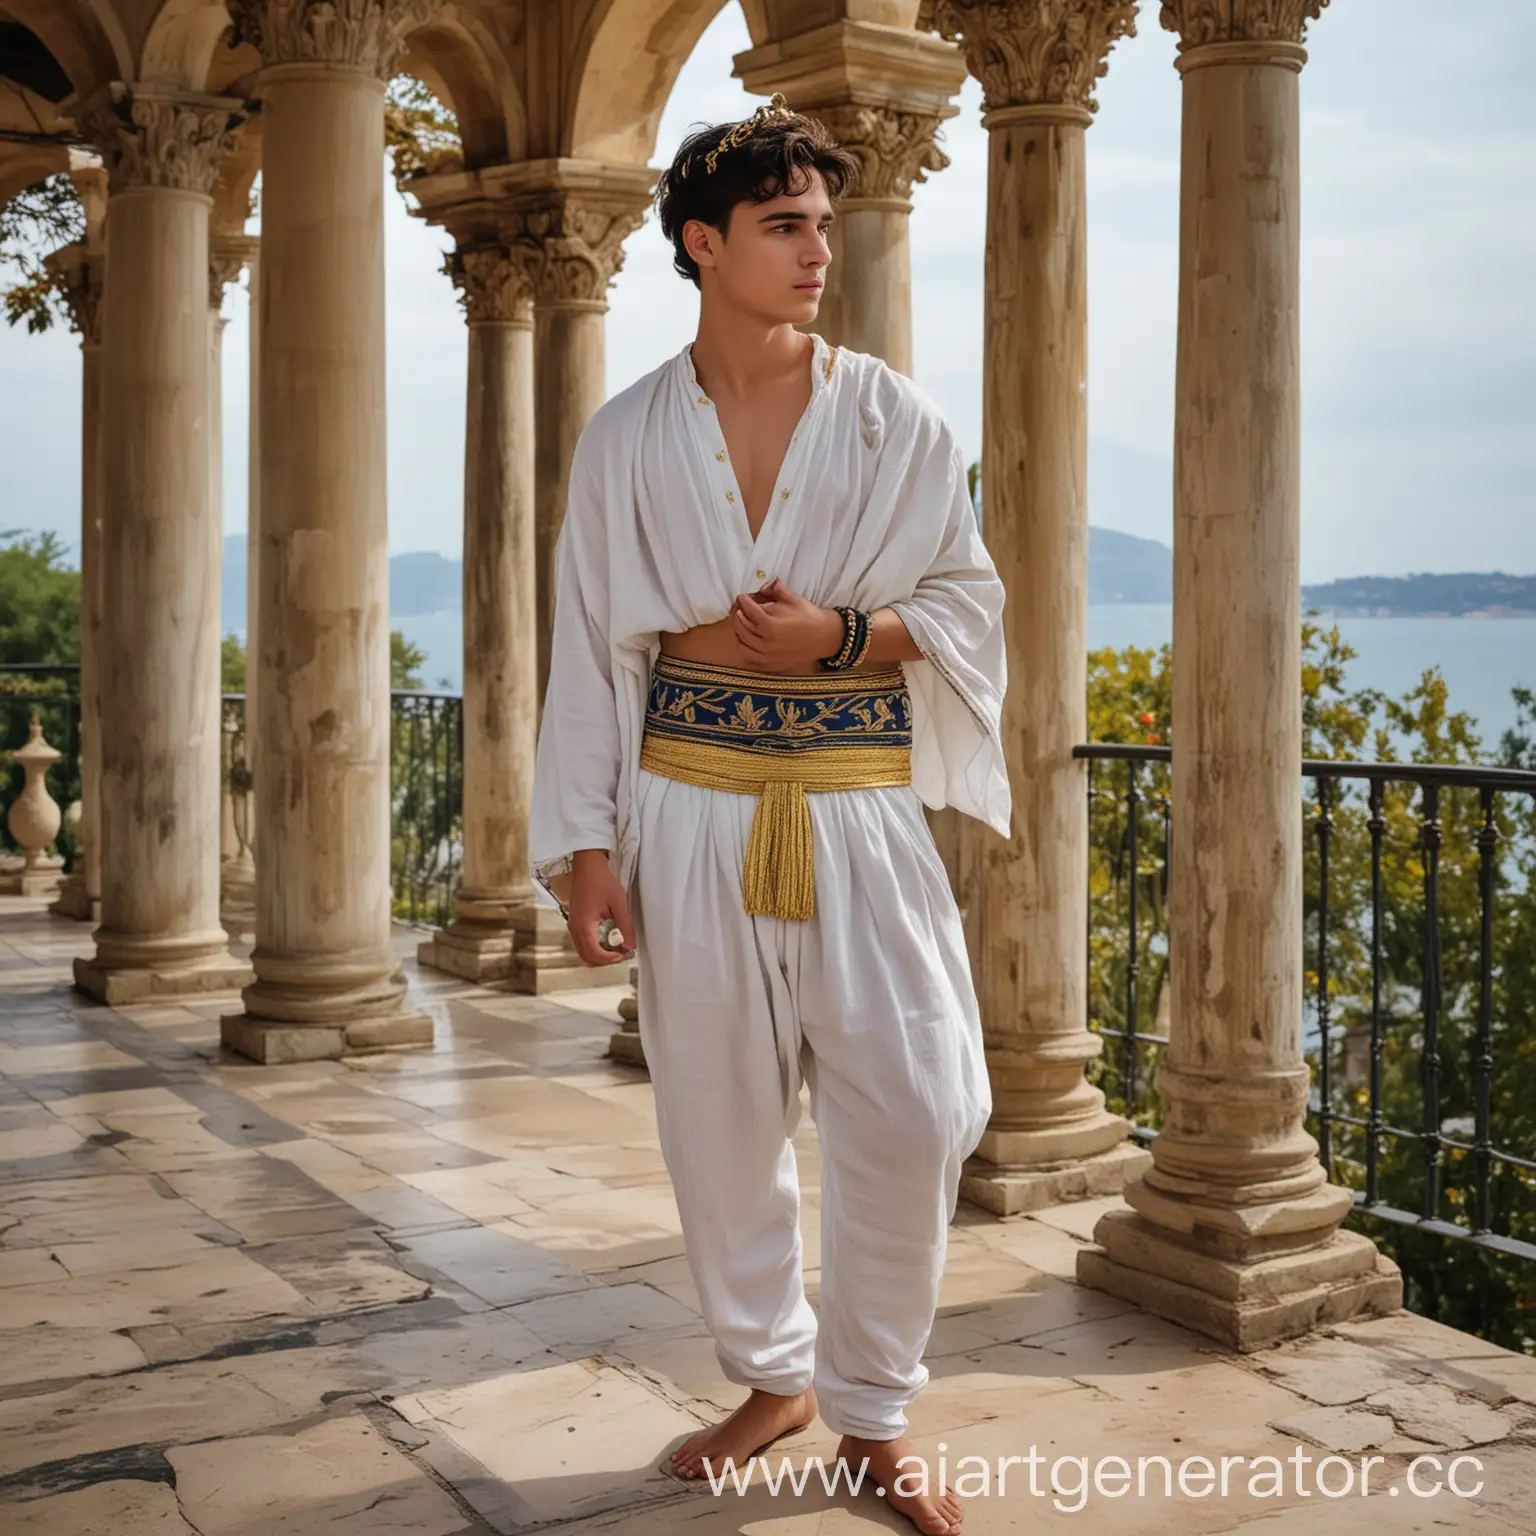 19YearOld-Youth-with-DualColored-Eyes-and-Golden-Laurels-at-Ancient-Seaside-Palace